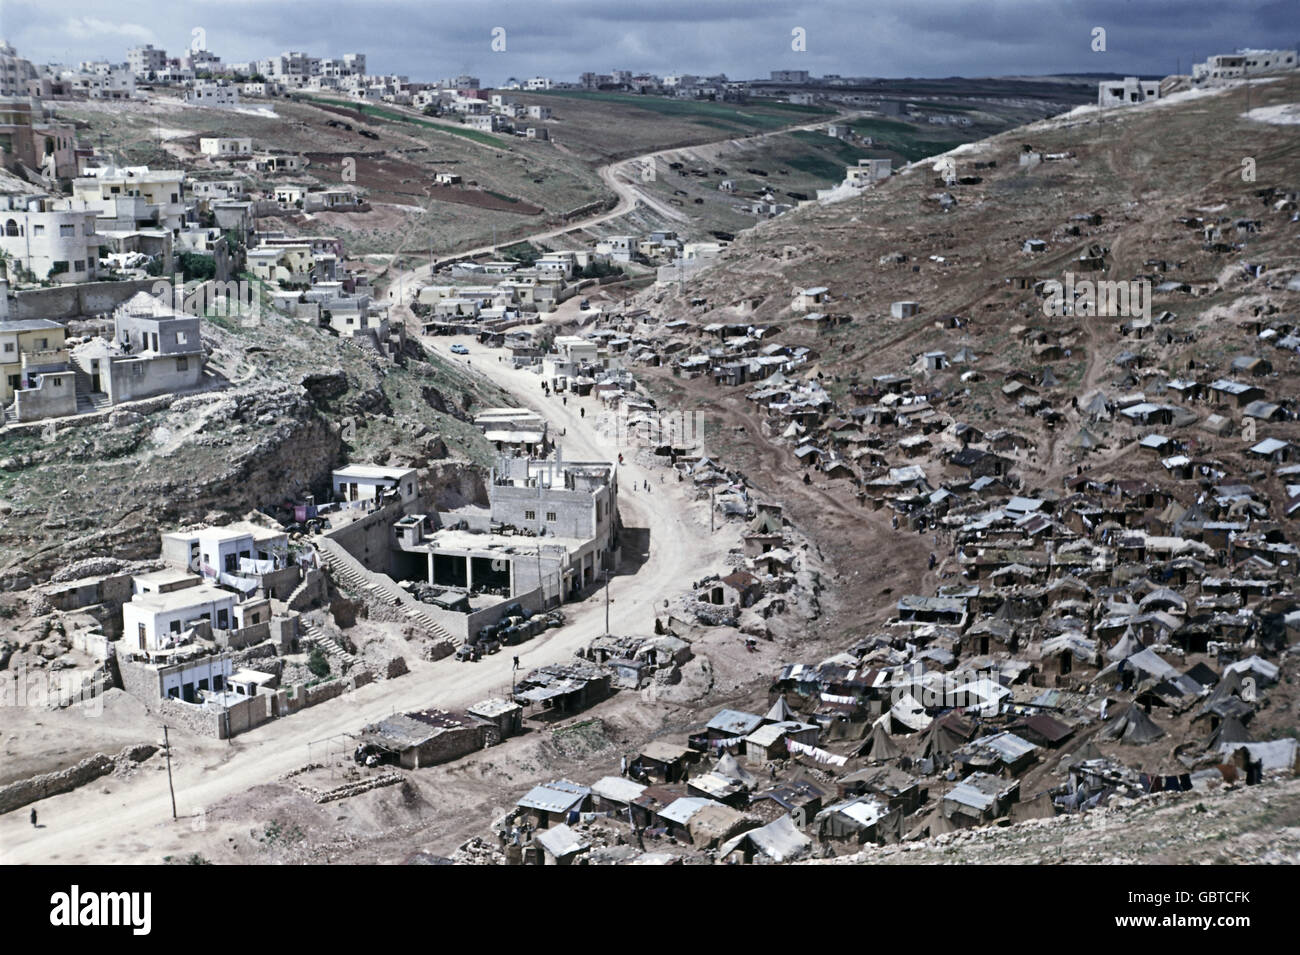 Geographie / Reisen, Jordanien, Amman, Stadtblick, Shanty Town, 1955, Additional-Rights-Clearences-not available Stockfoto